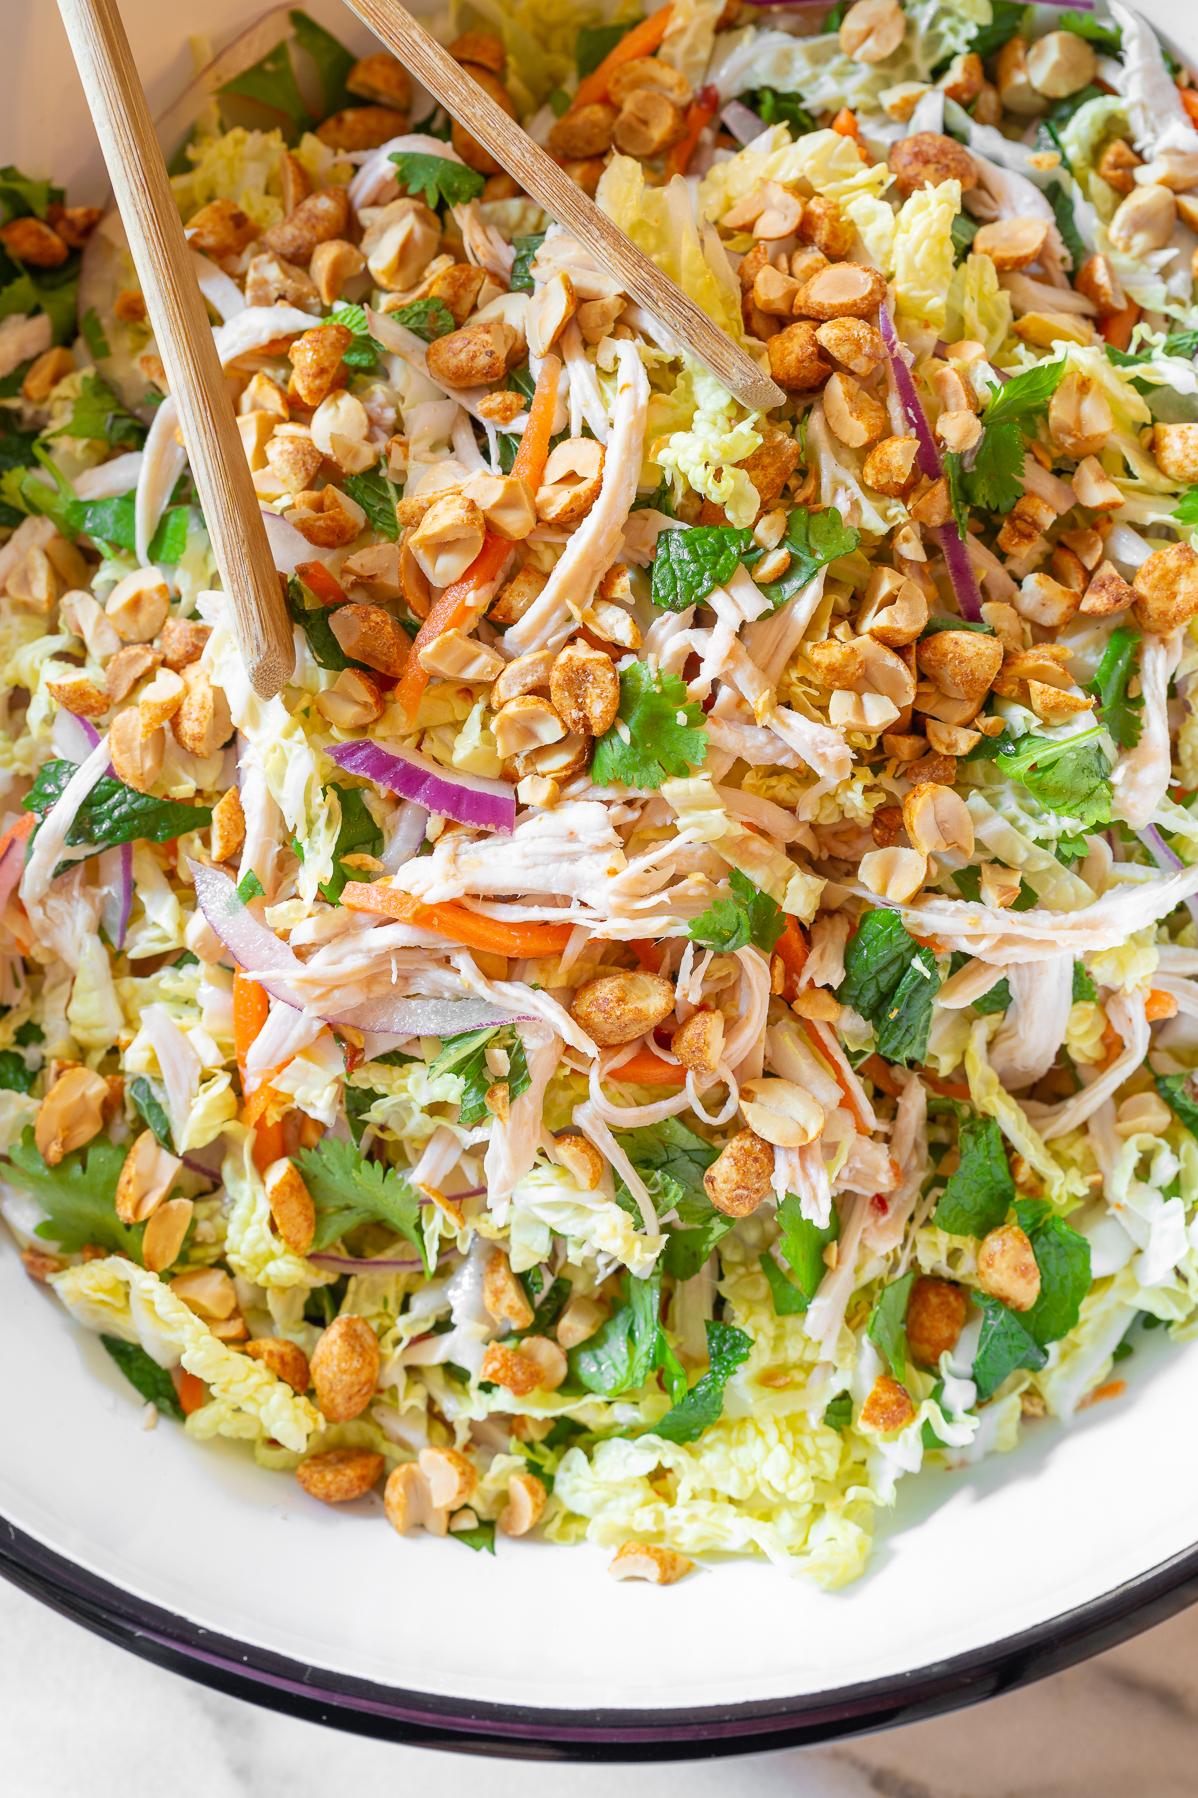  The combination of tender chicken and crisp cabbage is a match made in salad heaven.